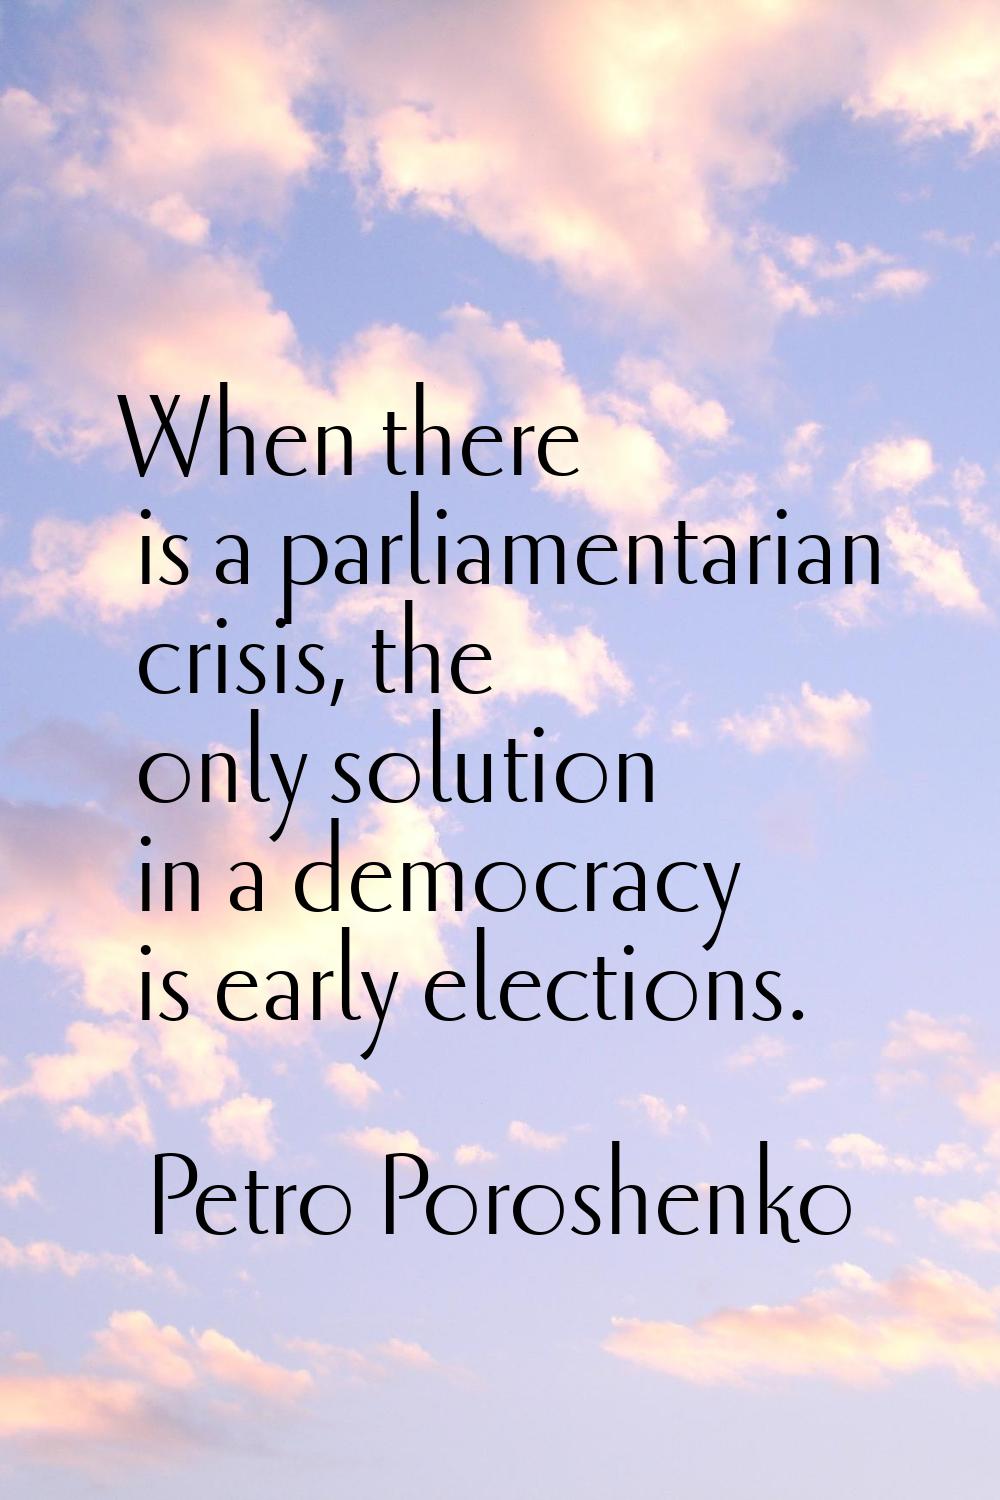 When there is a parliamentarian crisis, the only solution in a democracy is early elections.